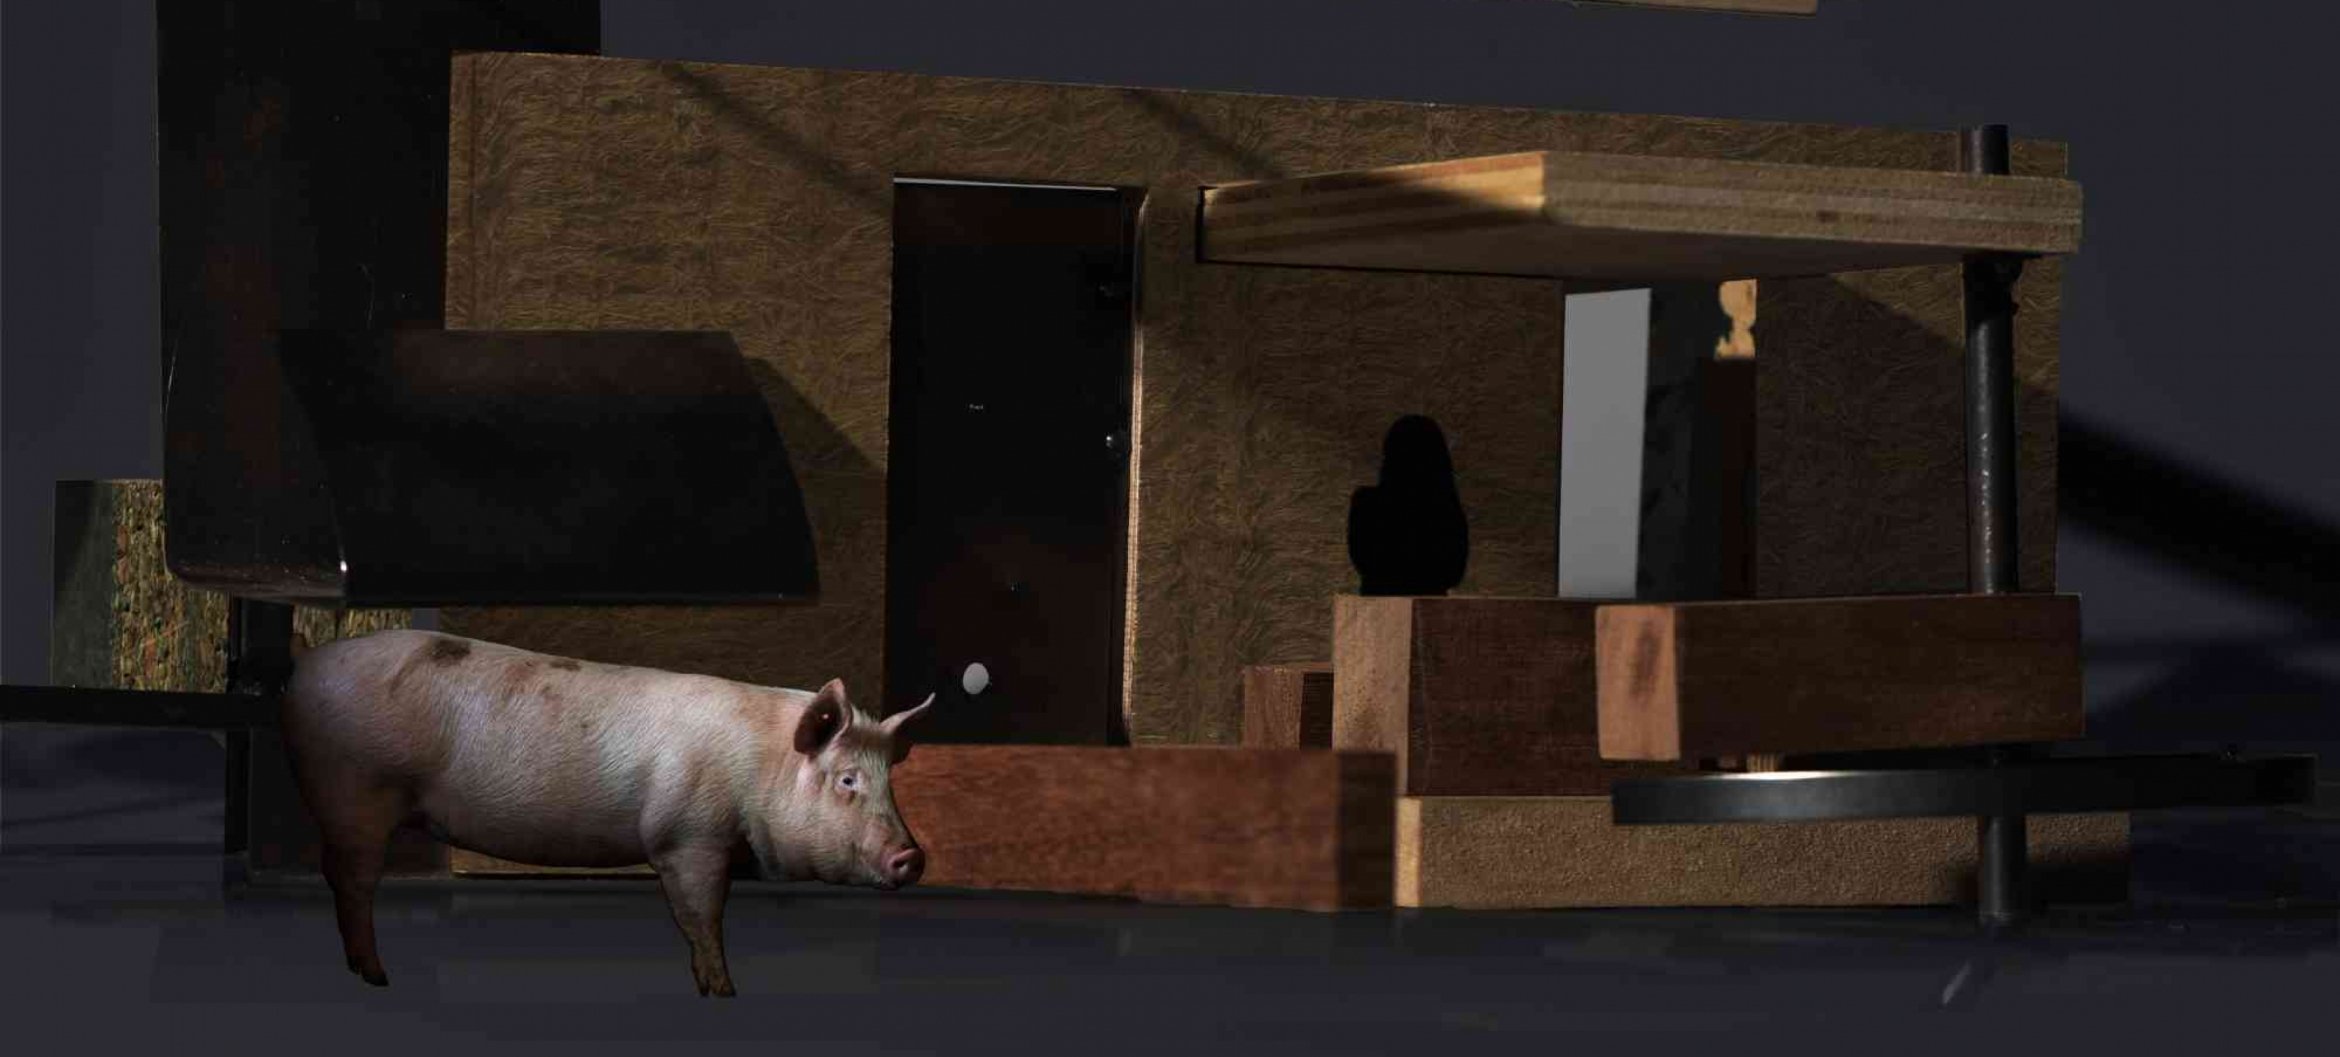 Living amongst pigs – designing for people and animals